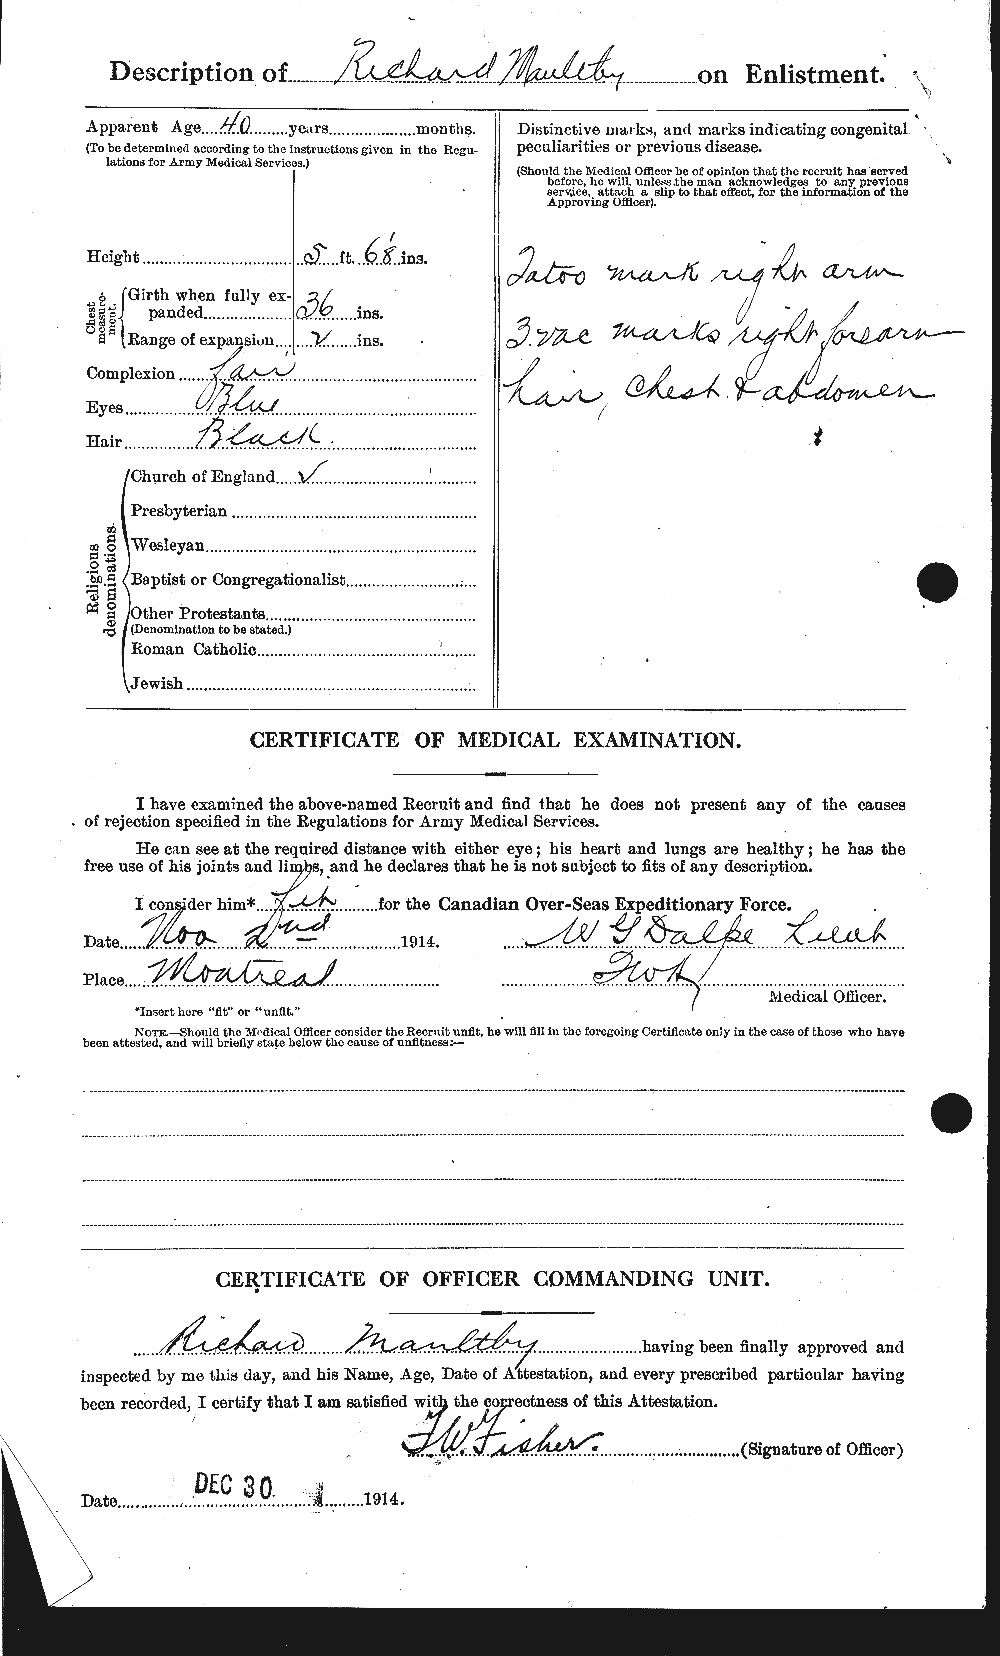 Personnel Records of the First World War - CEF 487787b